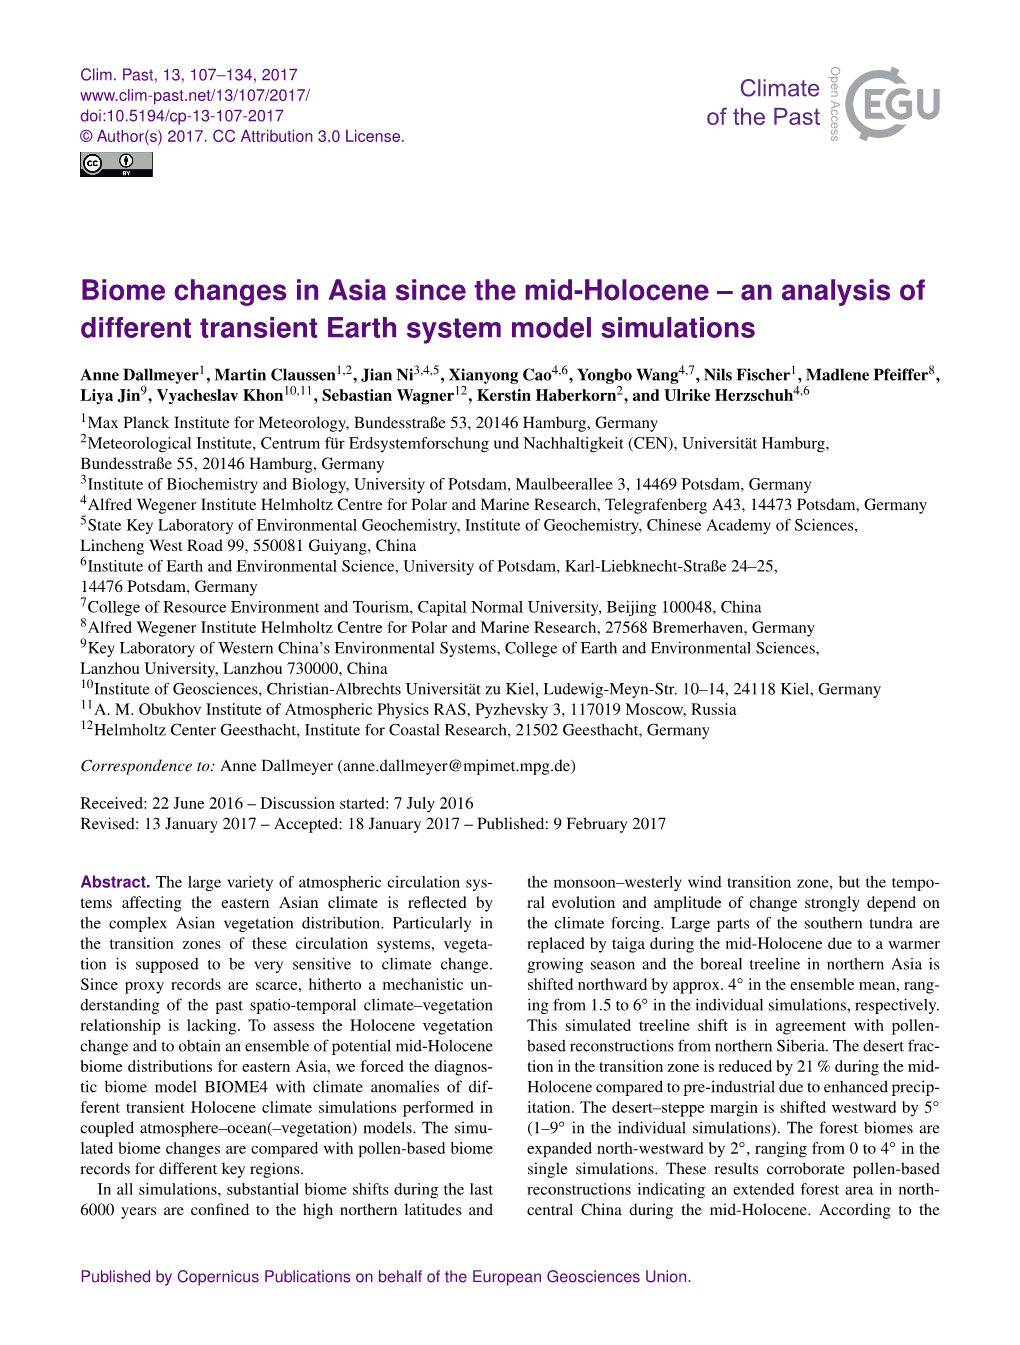 Biome Changes in Asia Since the Mid-Holocene – an Analysis of Different Transient Earth System Model Simulations